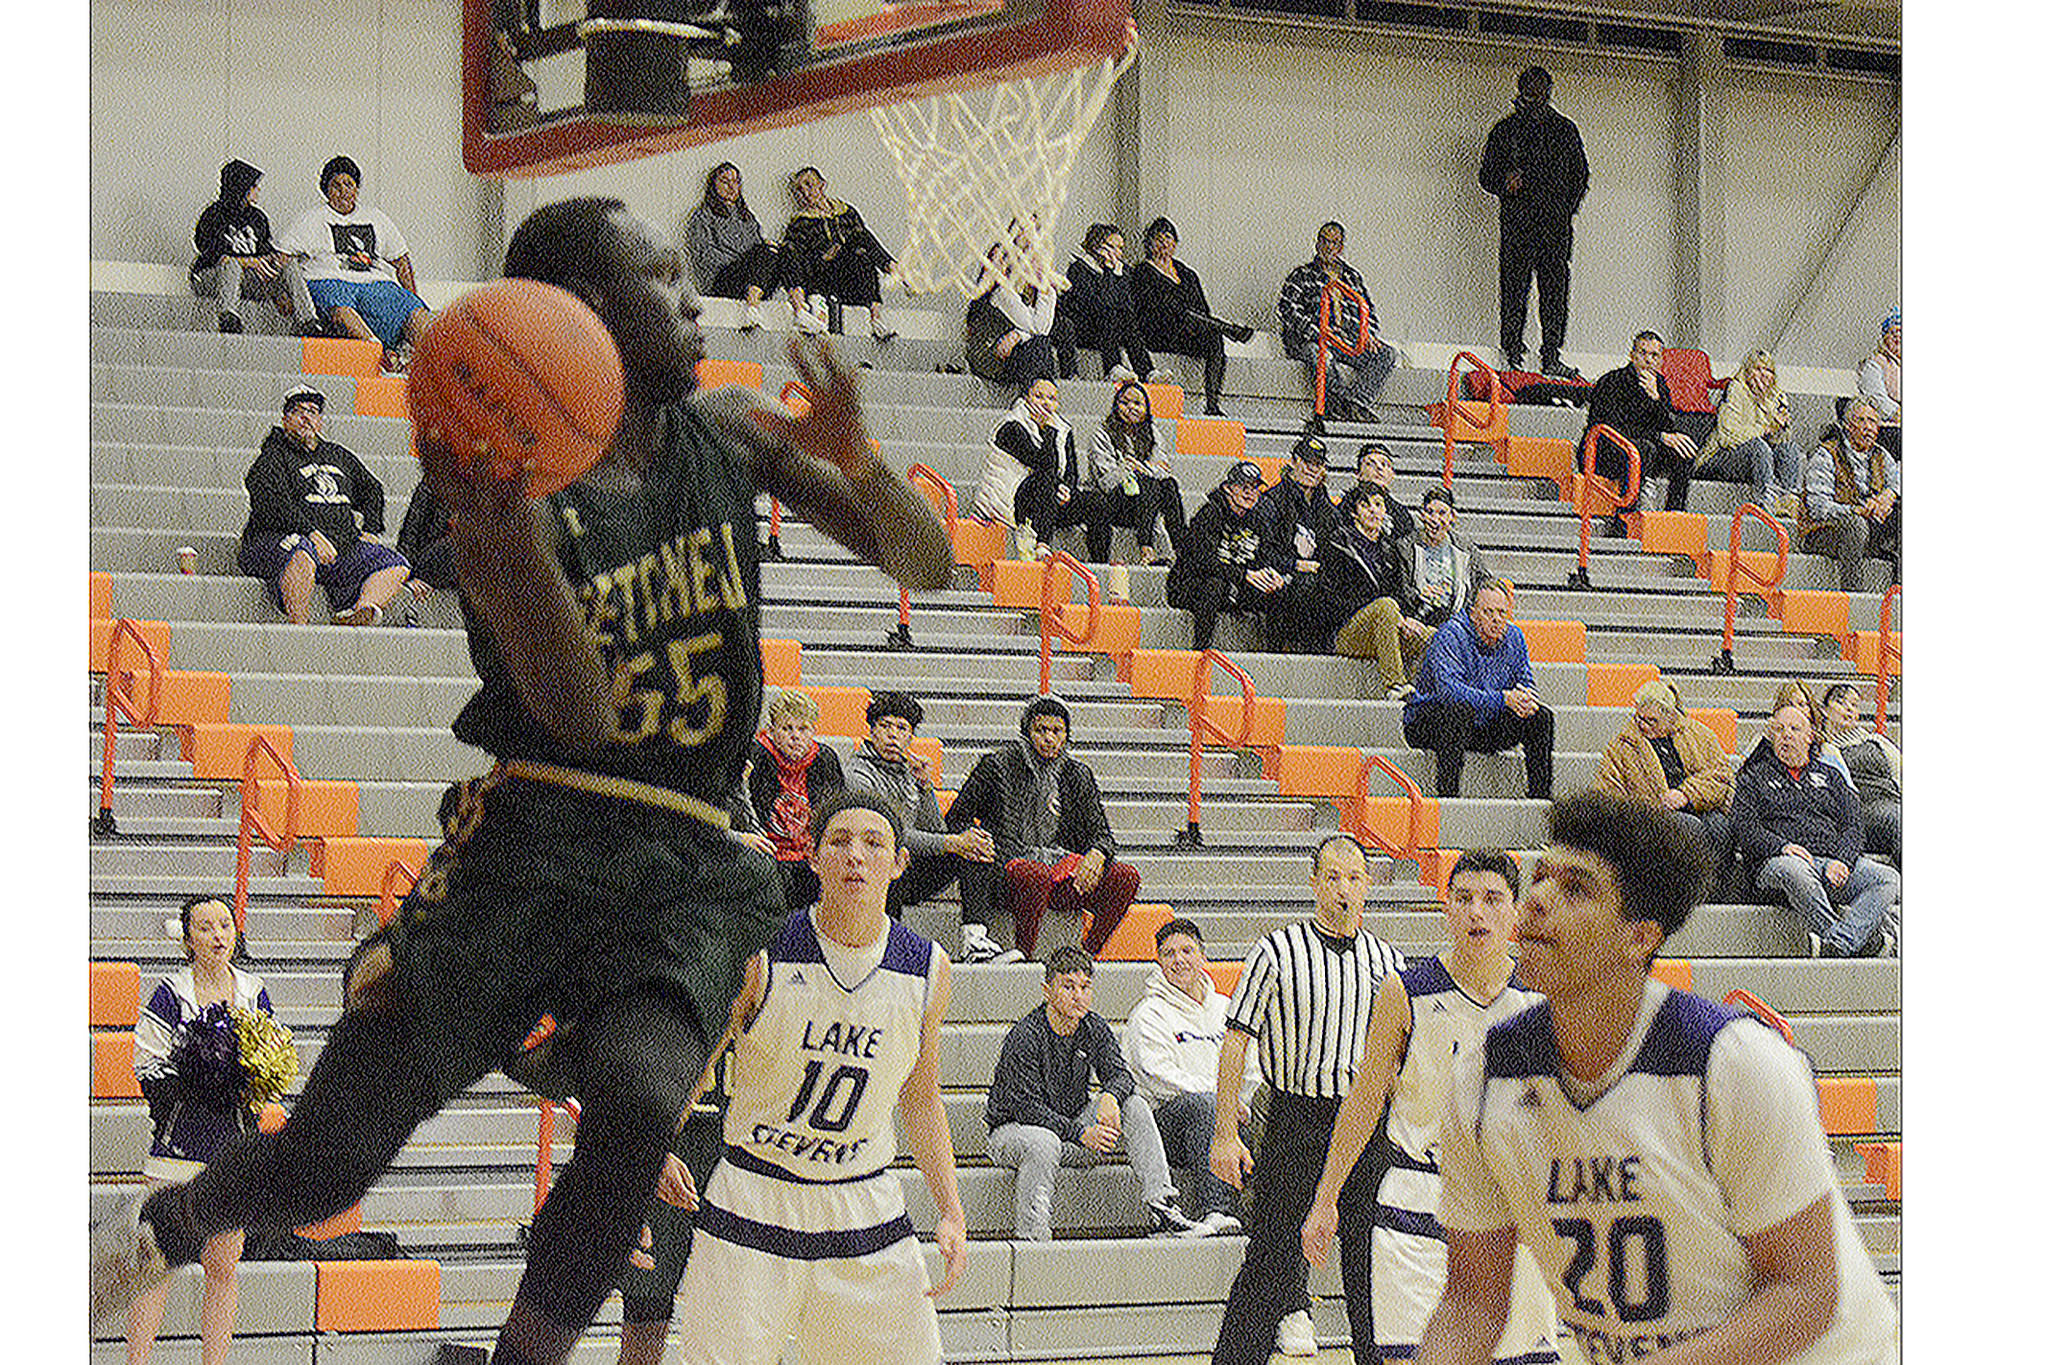 MG boys pick up a win at EvCC tourney (slide show)